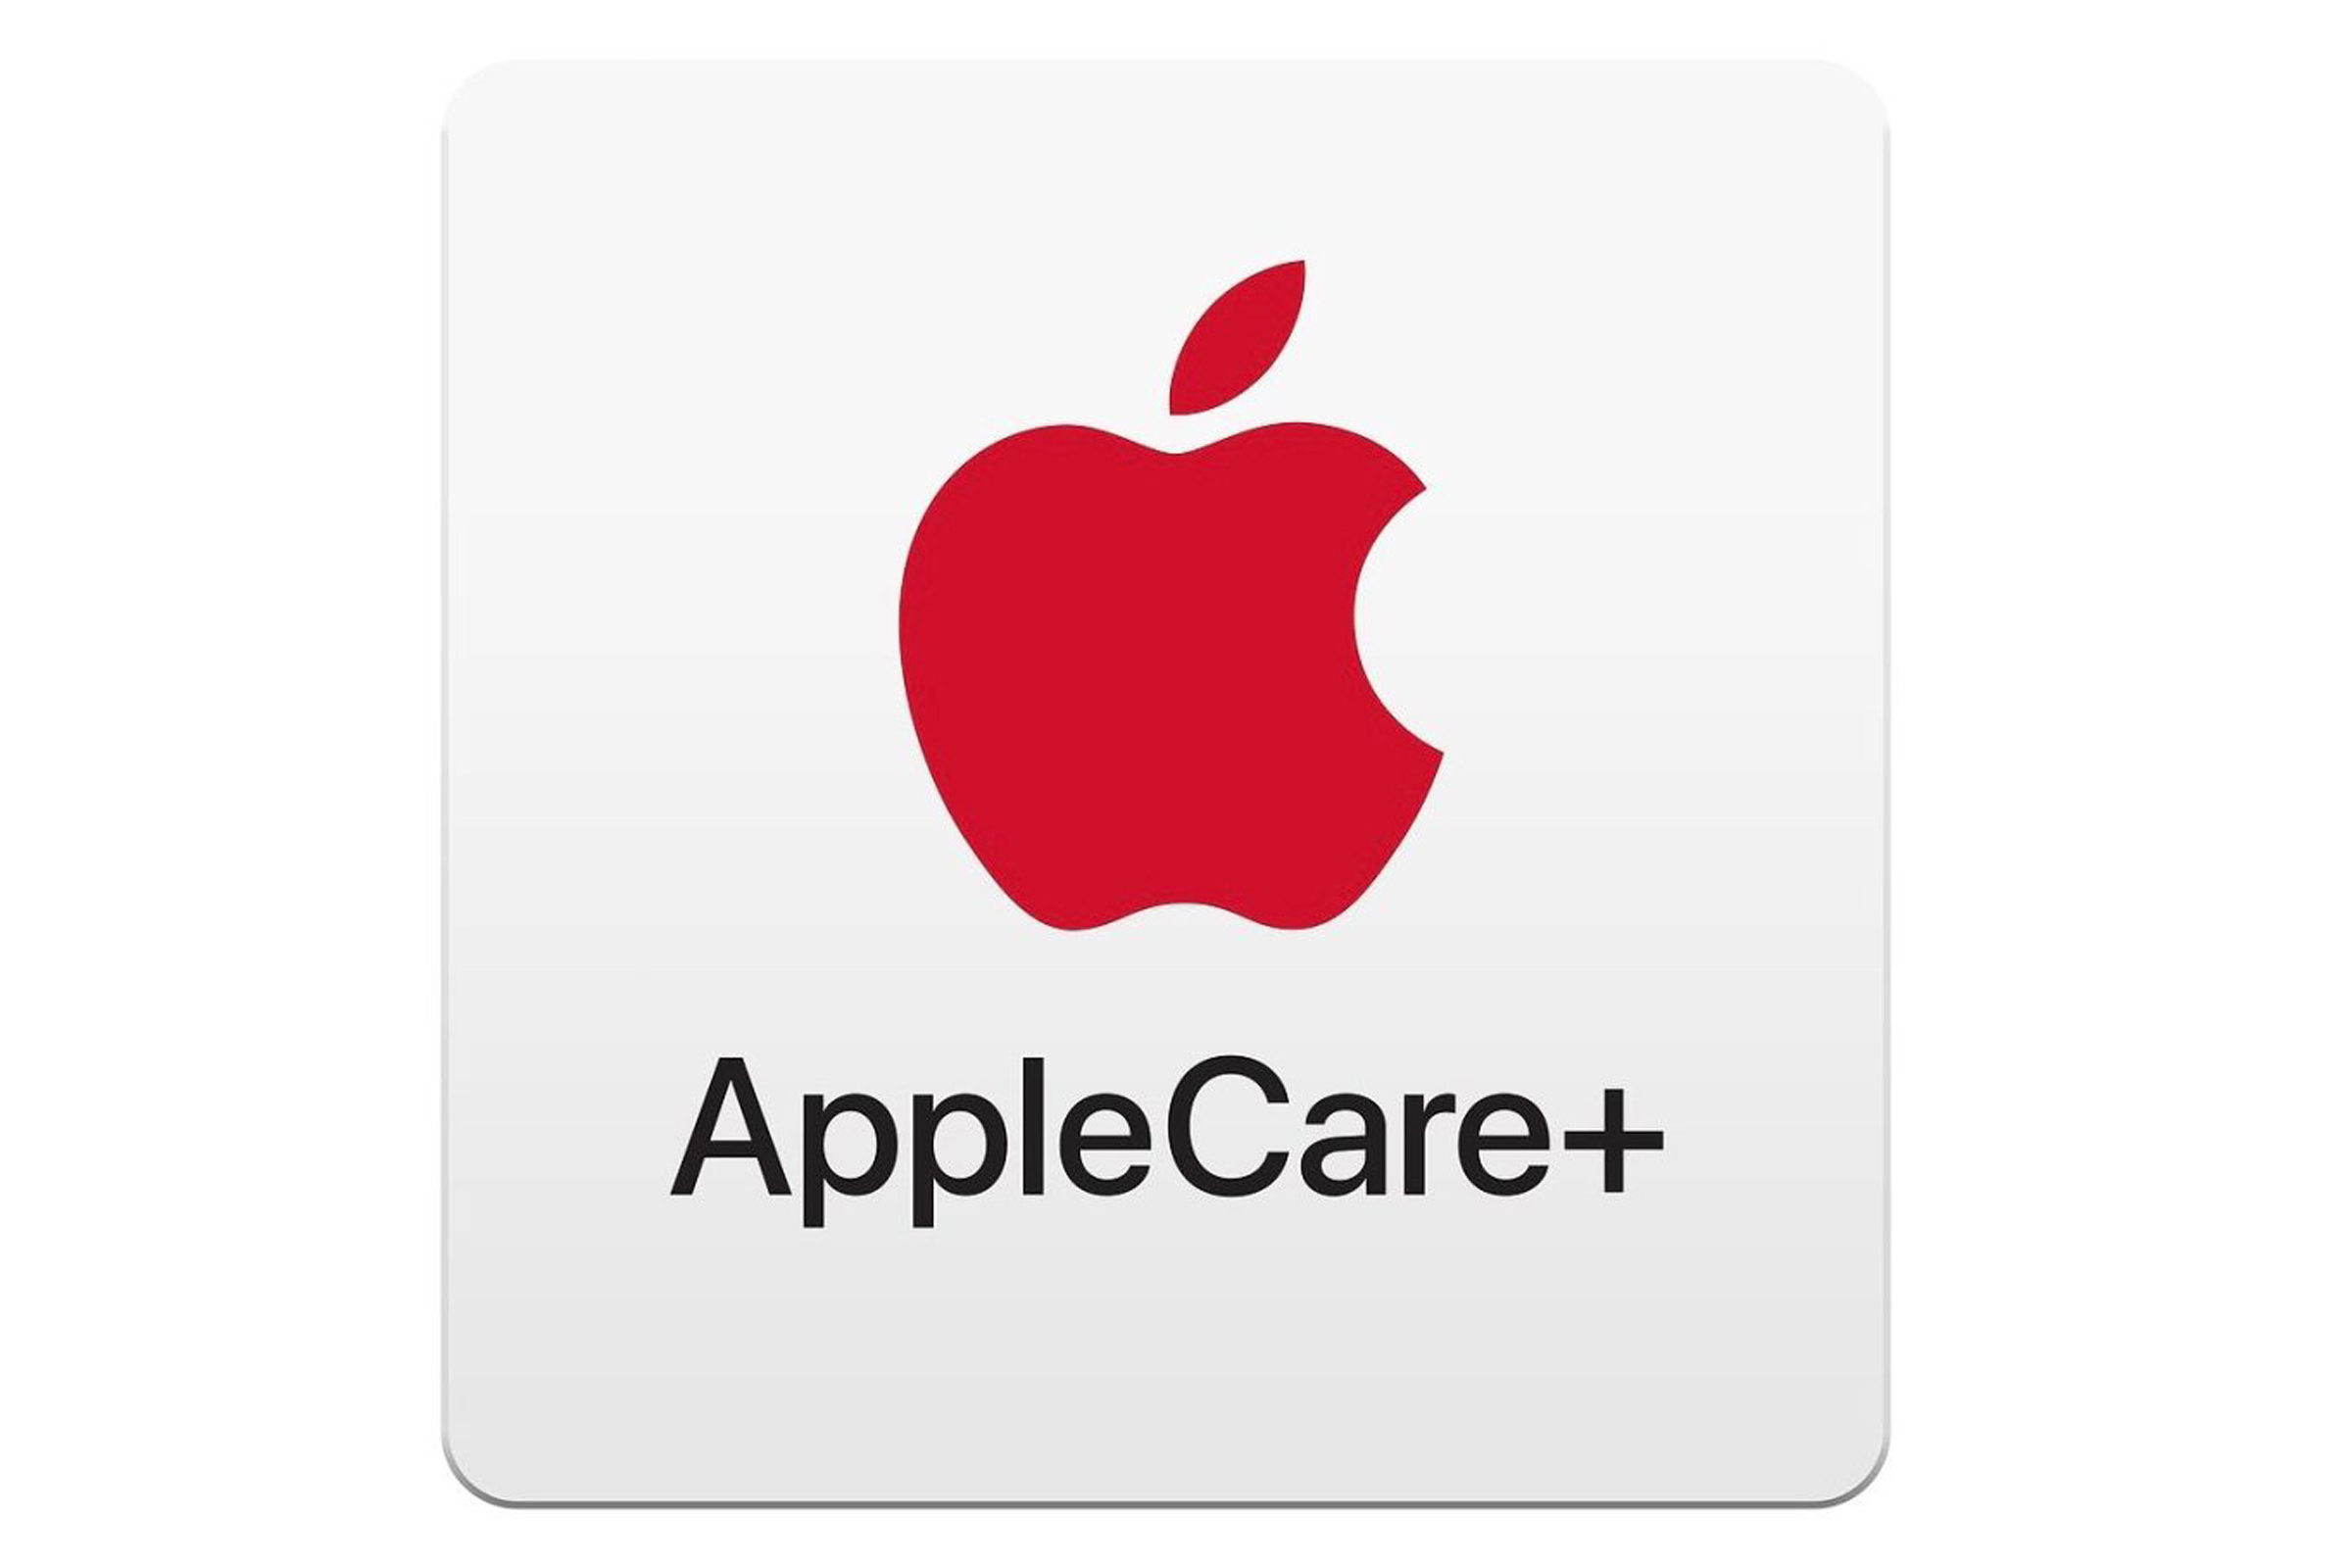 how to use applecare for macbook pro